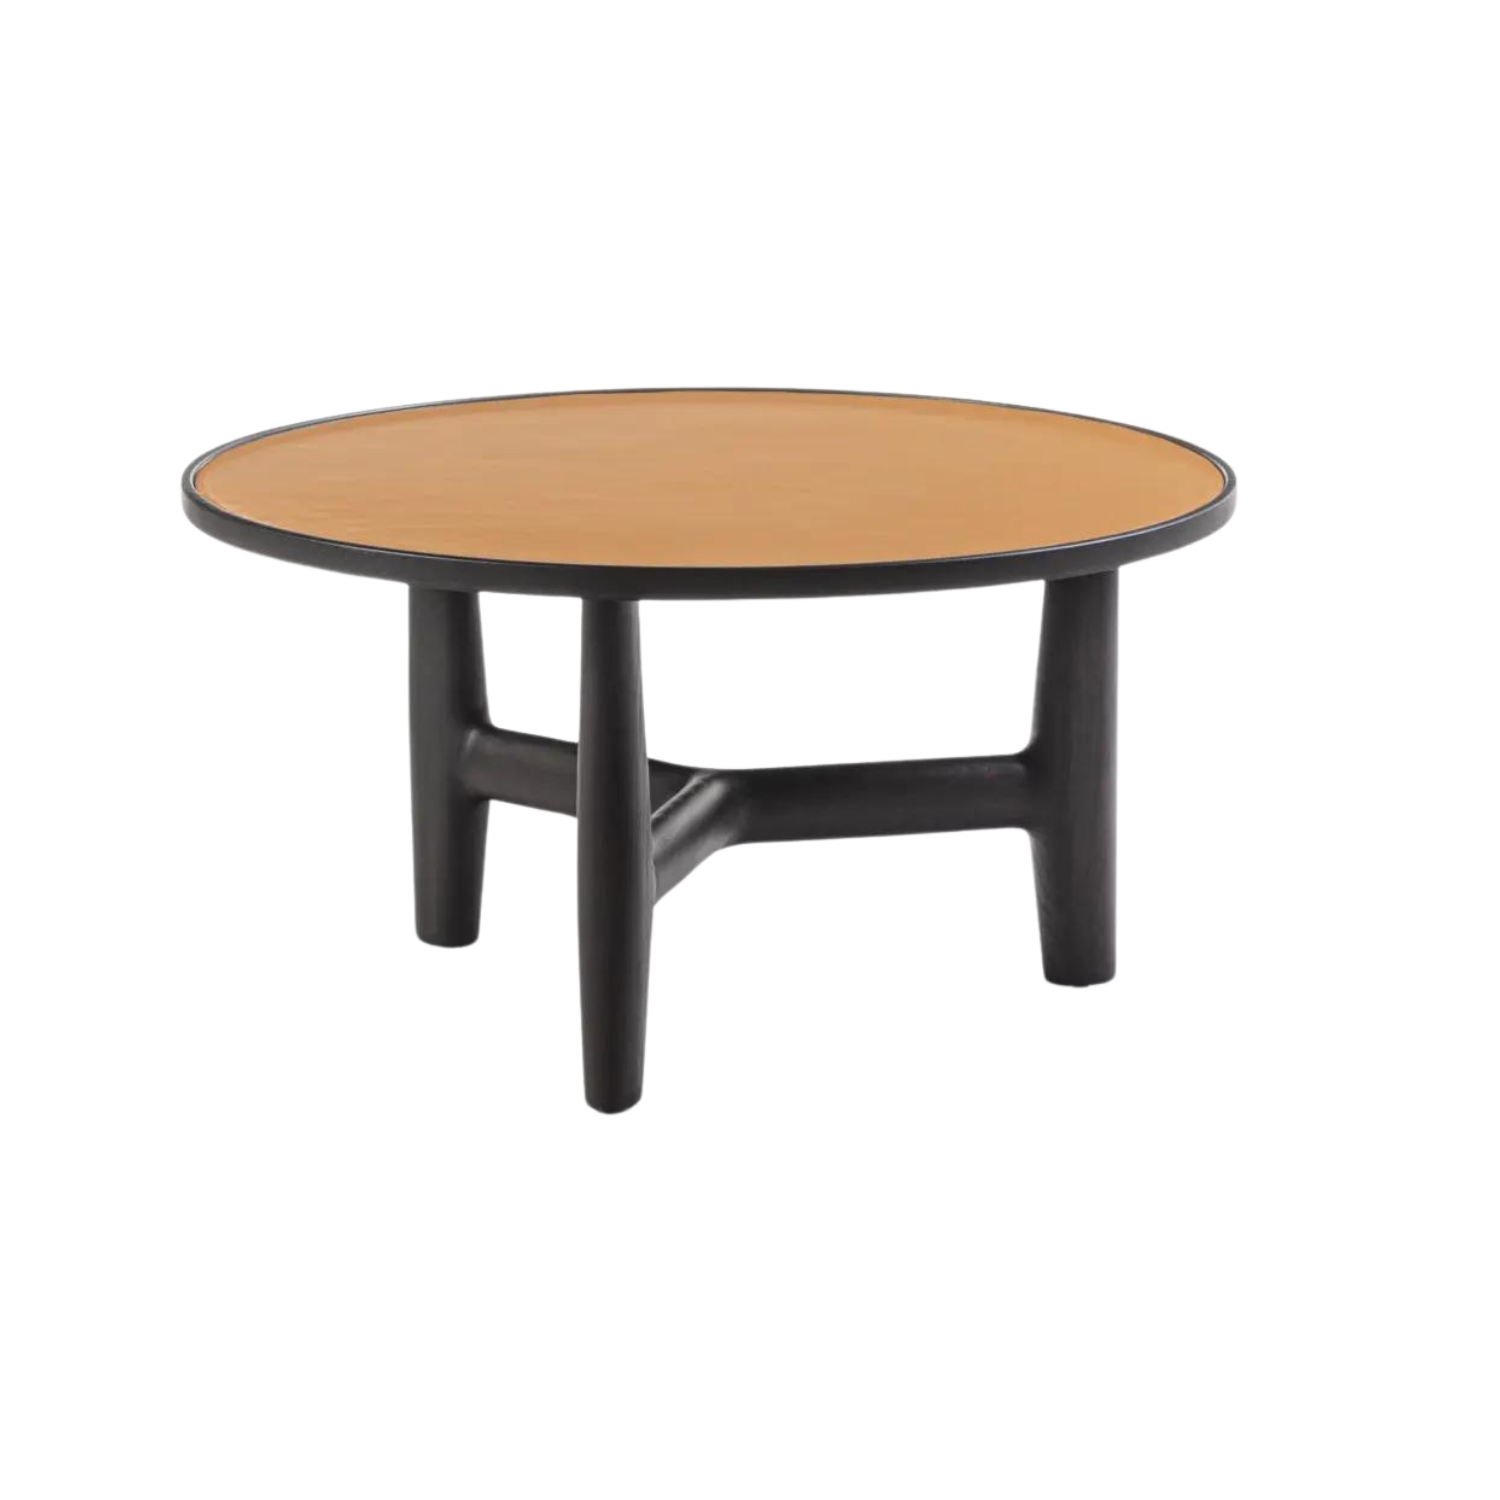 TILLOW 85 - Side Table